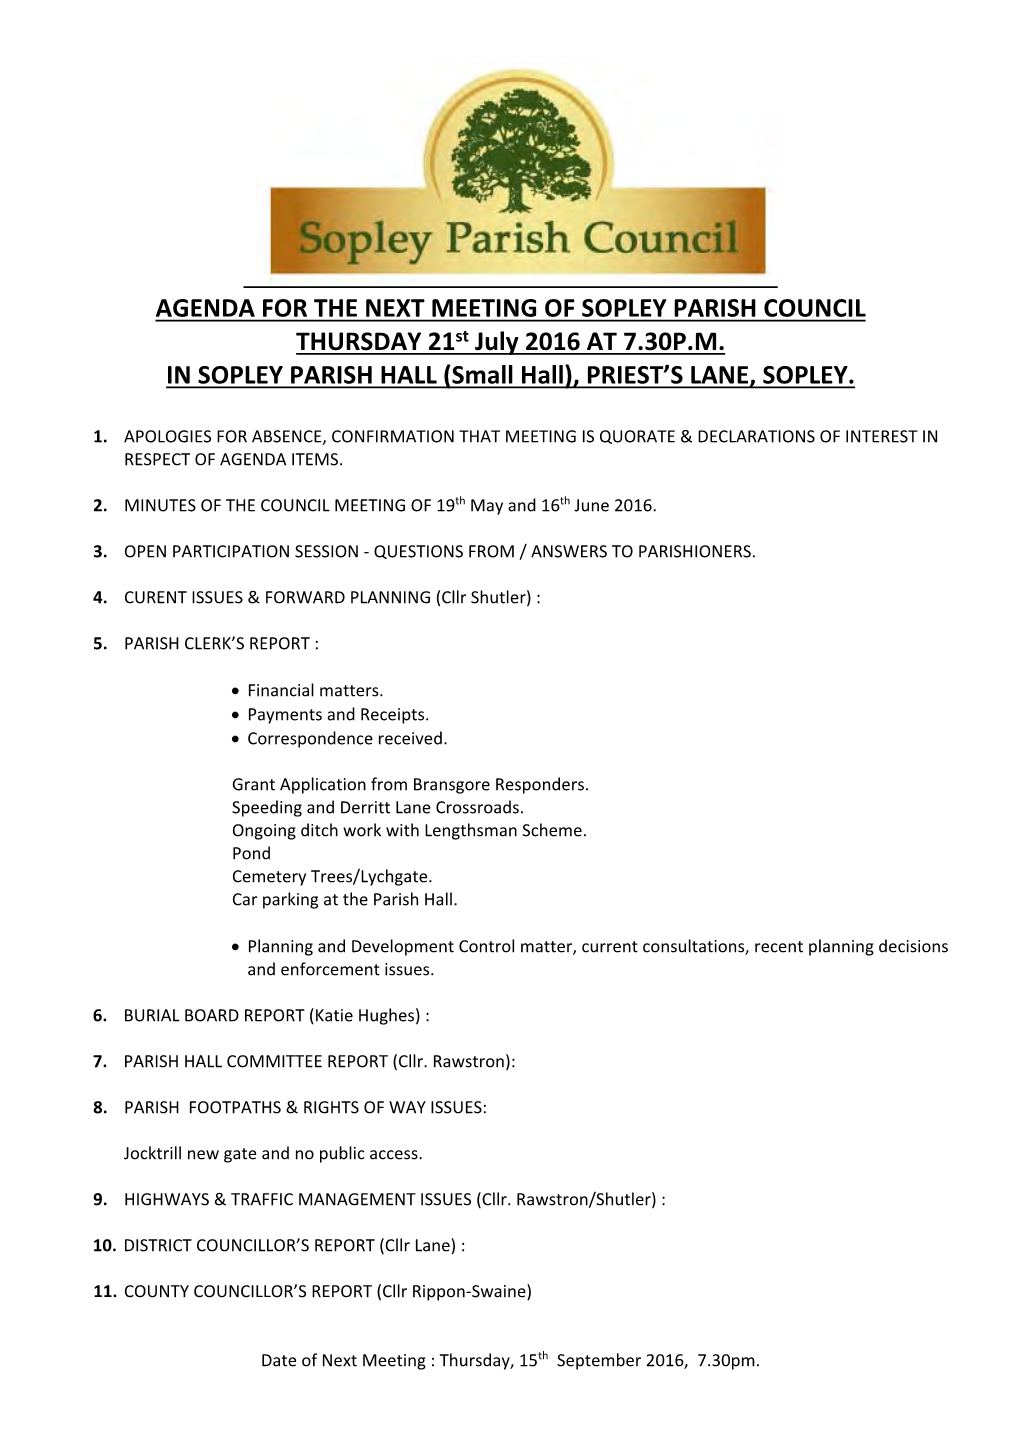 AGENDA for the NEXT MEETING of SOPLEY PARISH COUNCIL THURSDAY 21St July 2016 at 7.30P.M